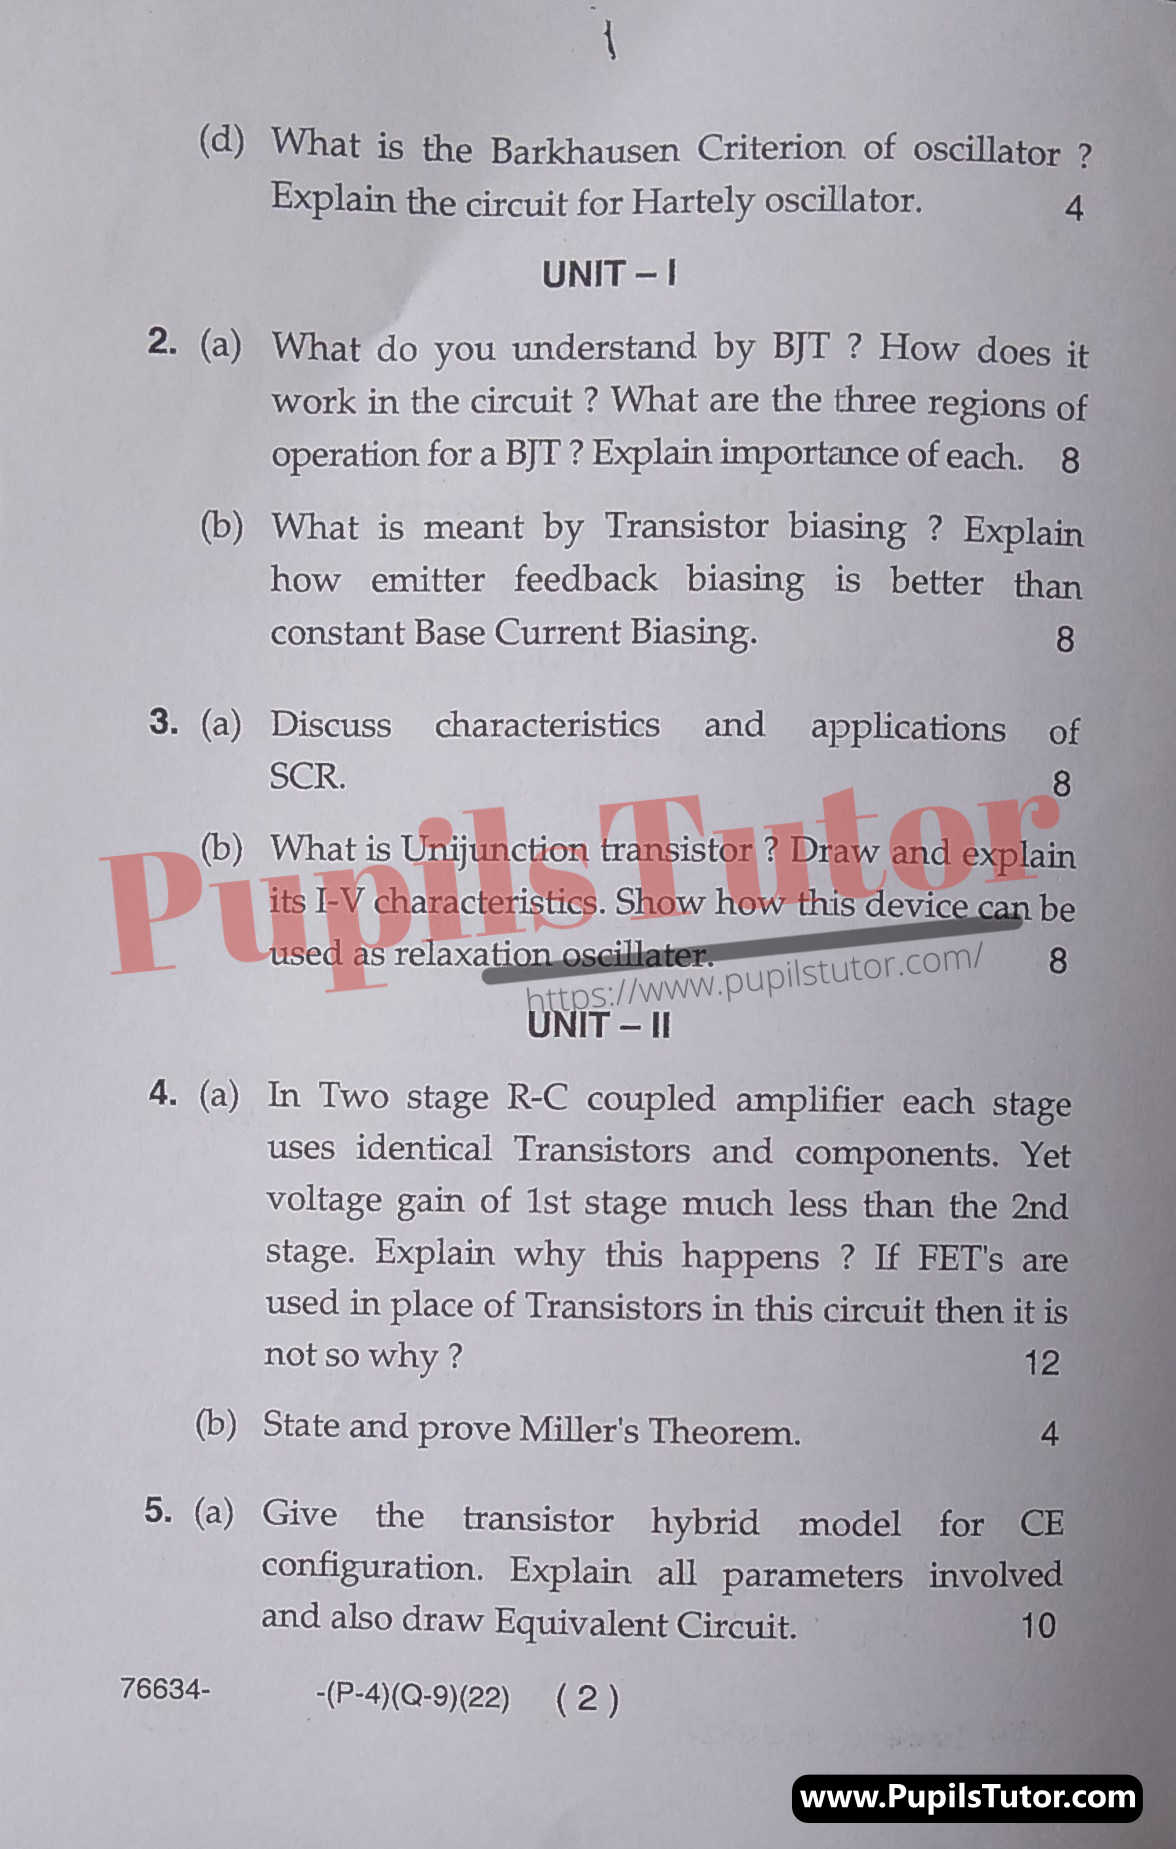 M.D. University M.Sc. [Physics] Electronics-I Third Semester Important Question Answer And Solution - www.pupilstutor.com (Paper Page Number 2)